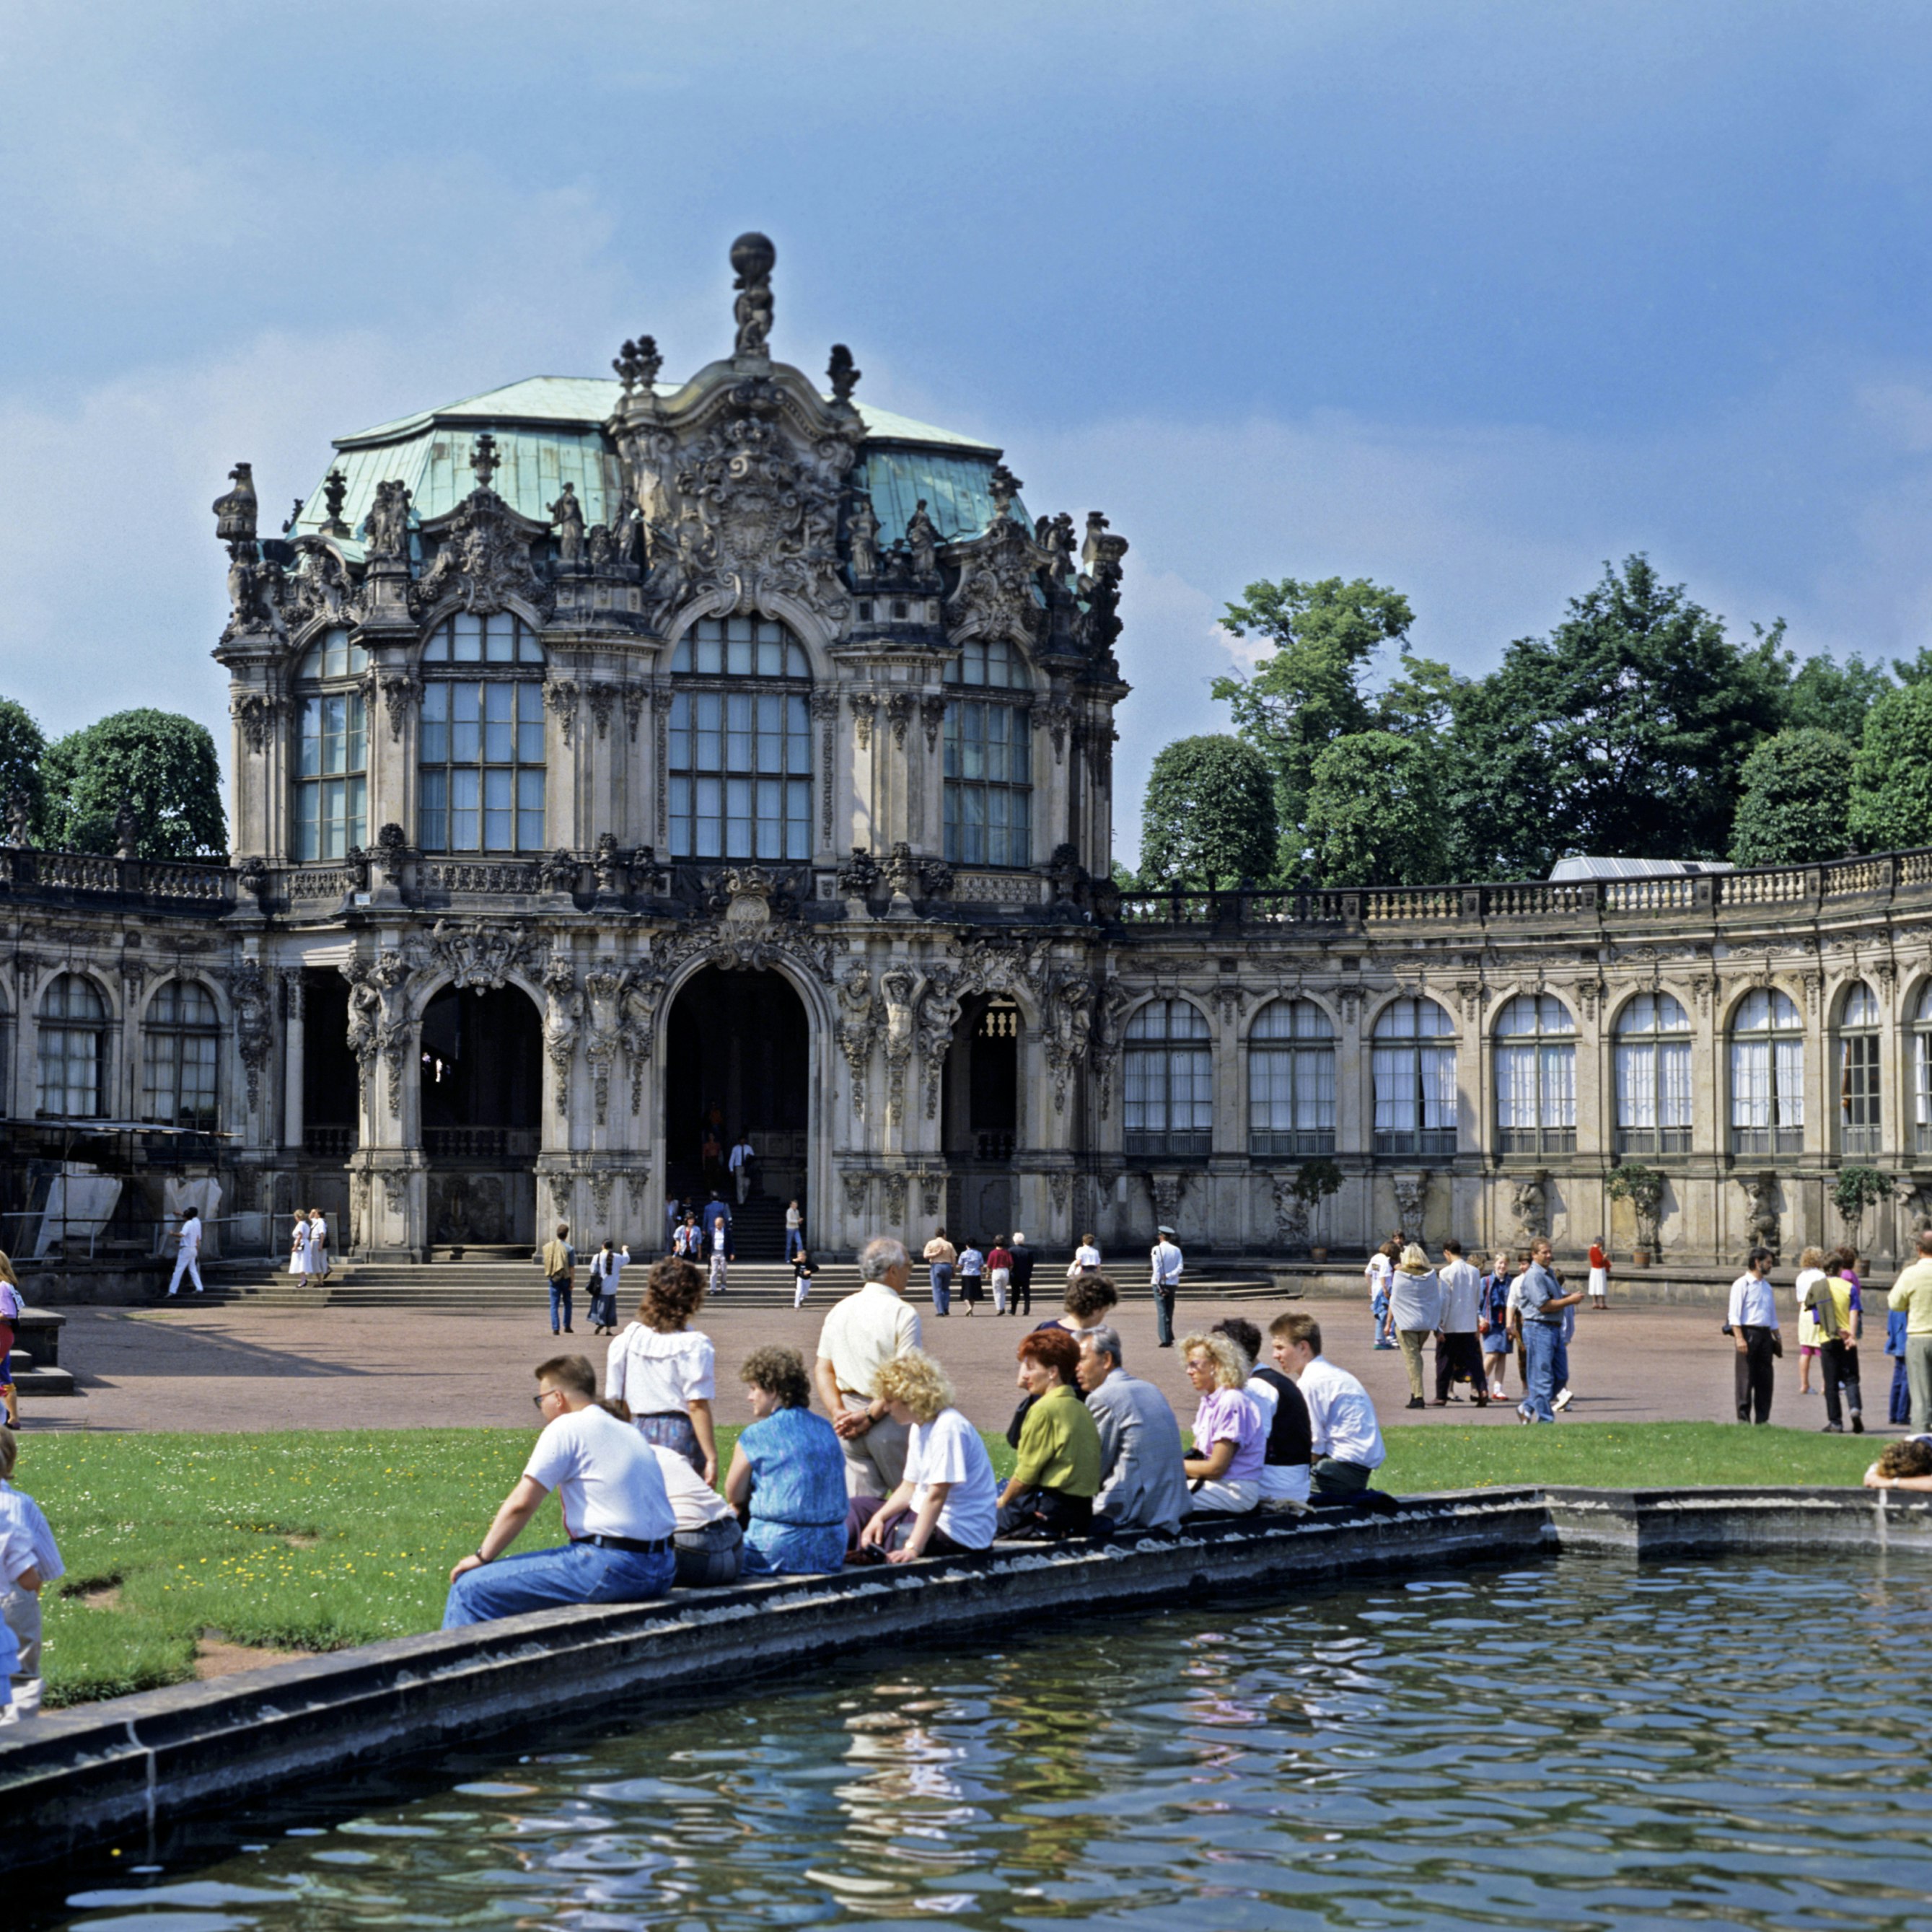 The Zwinger Palace, baroque architecture